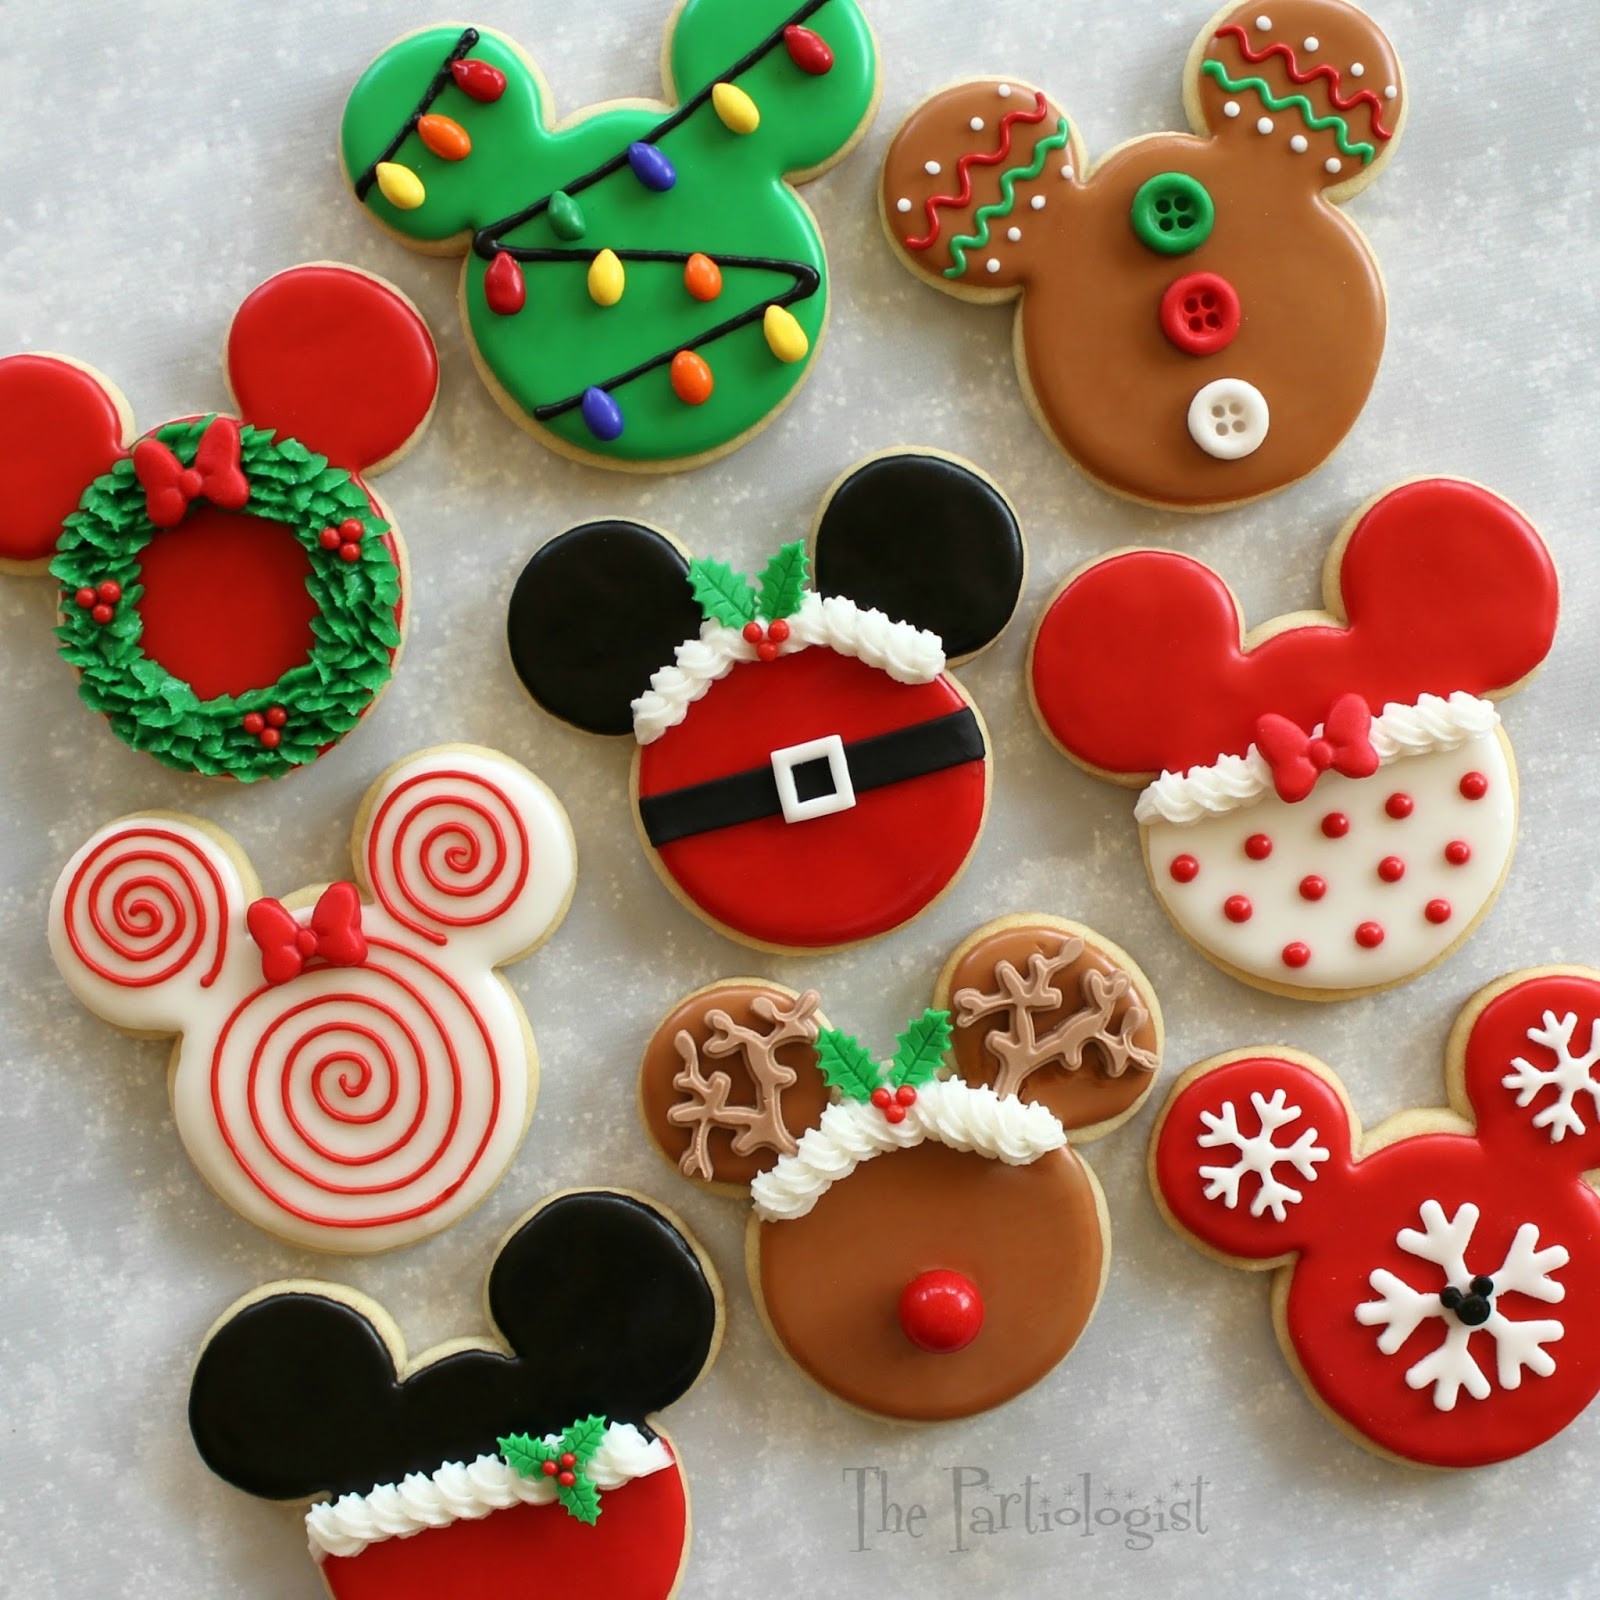 Make Christmas Cookies
 The Partiologist Disney Themed Christmas Cookies